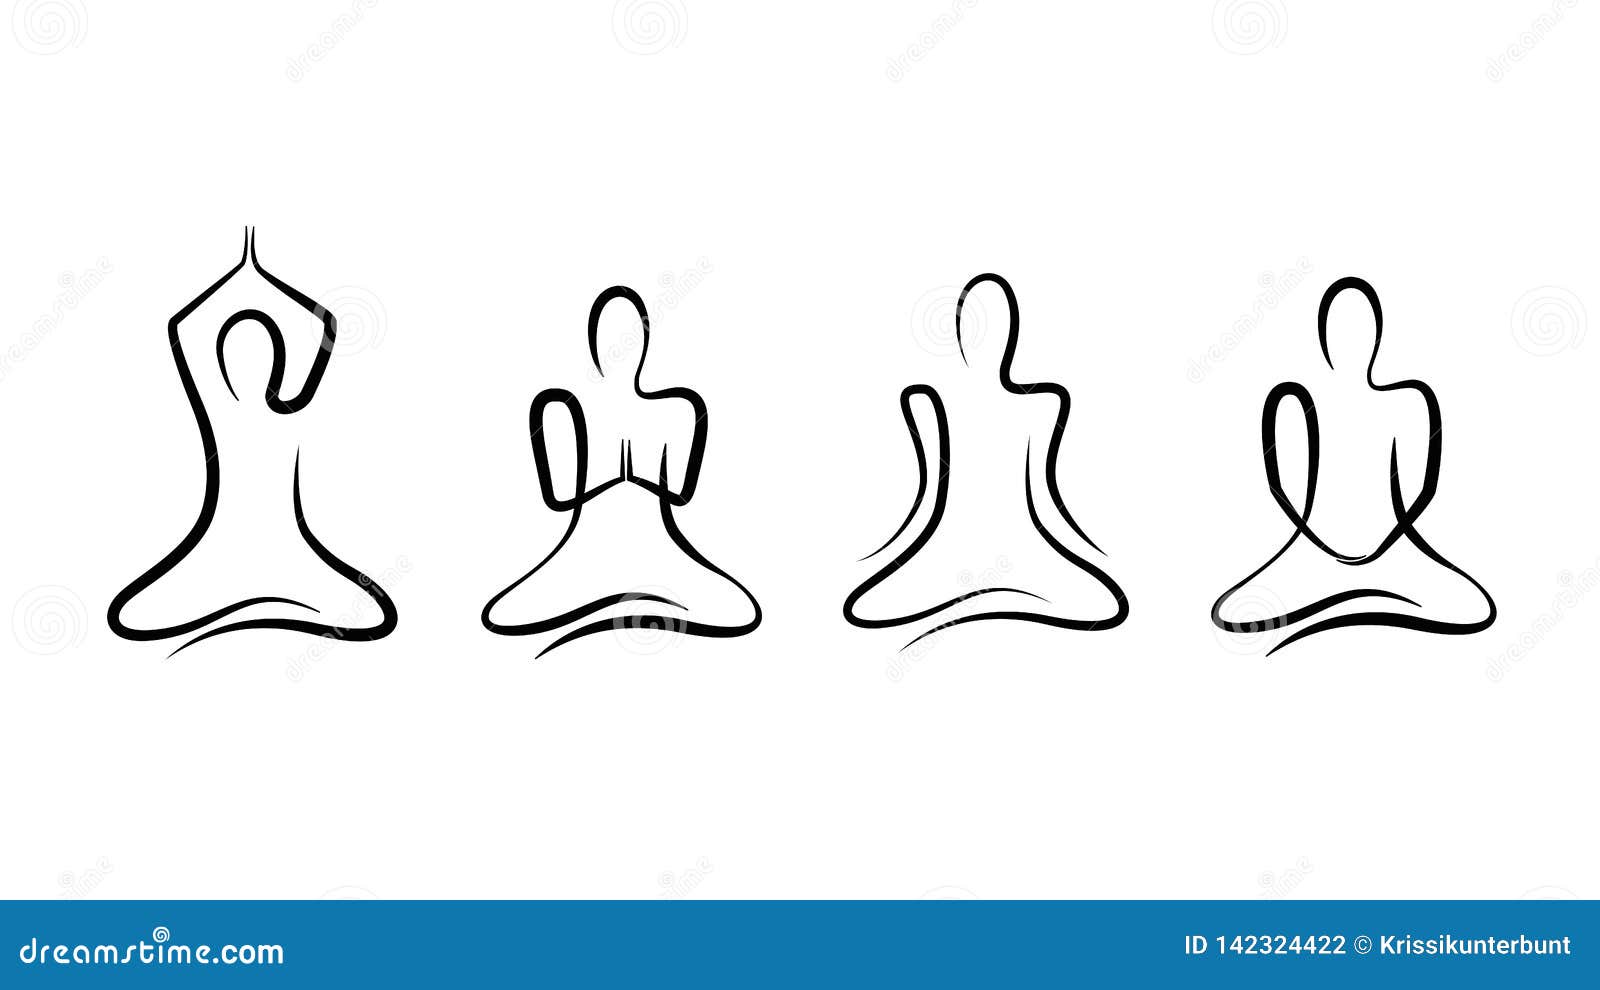 Different Yoga Poses Vector Line Drawings Stock Vector (Royalty Free)  1556099486 | Shutterstock